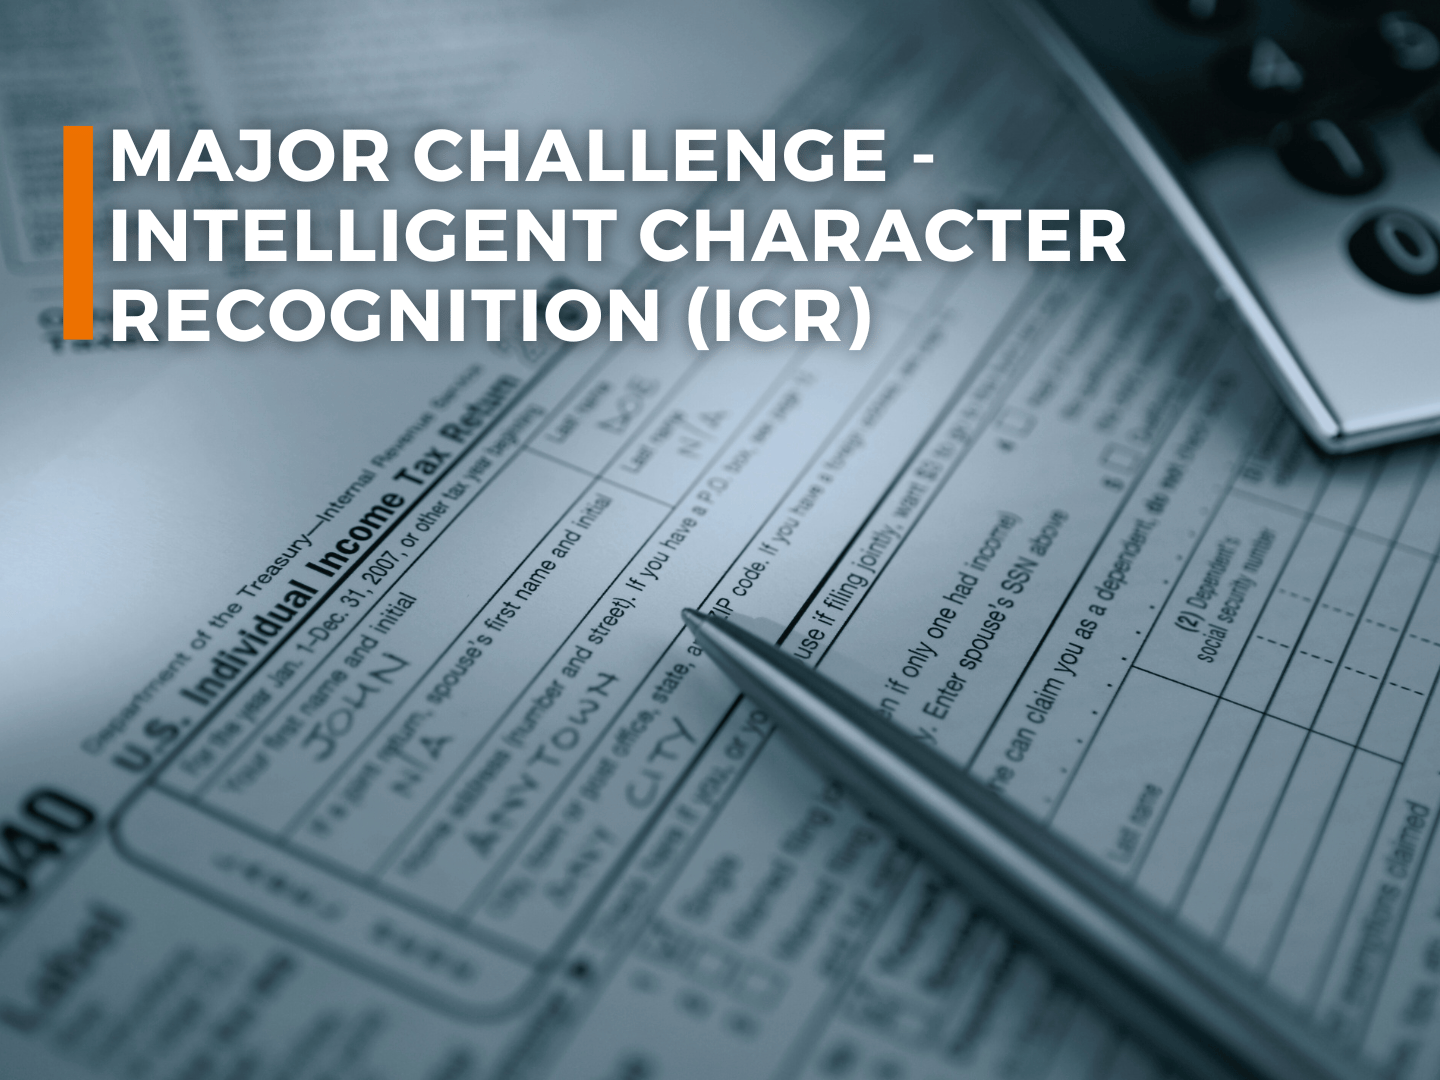 Herausforderung - Intelligent Character Recognition (ICR)